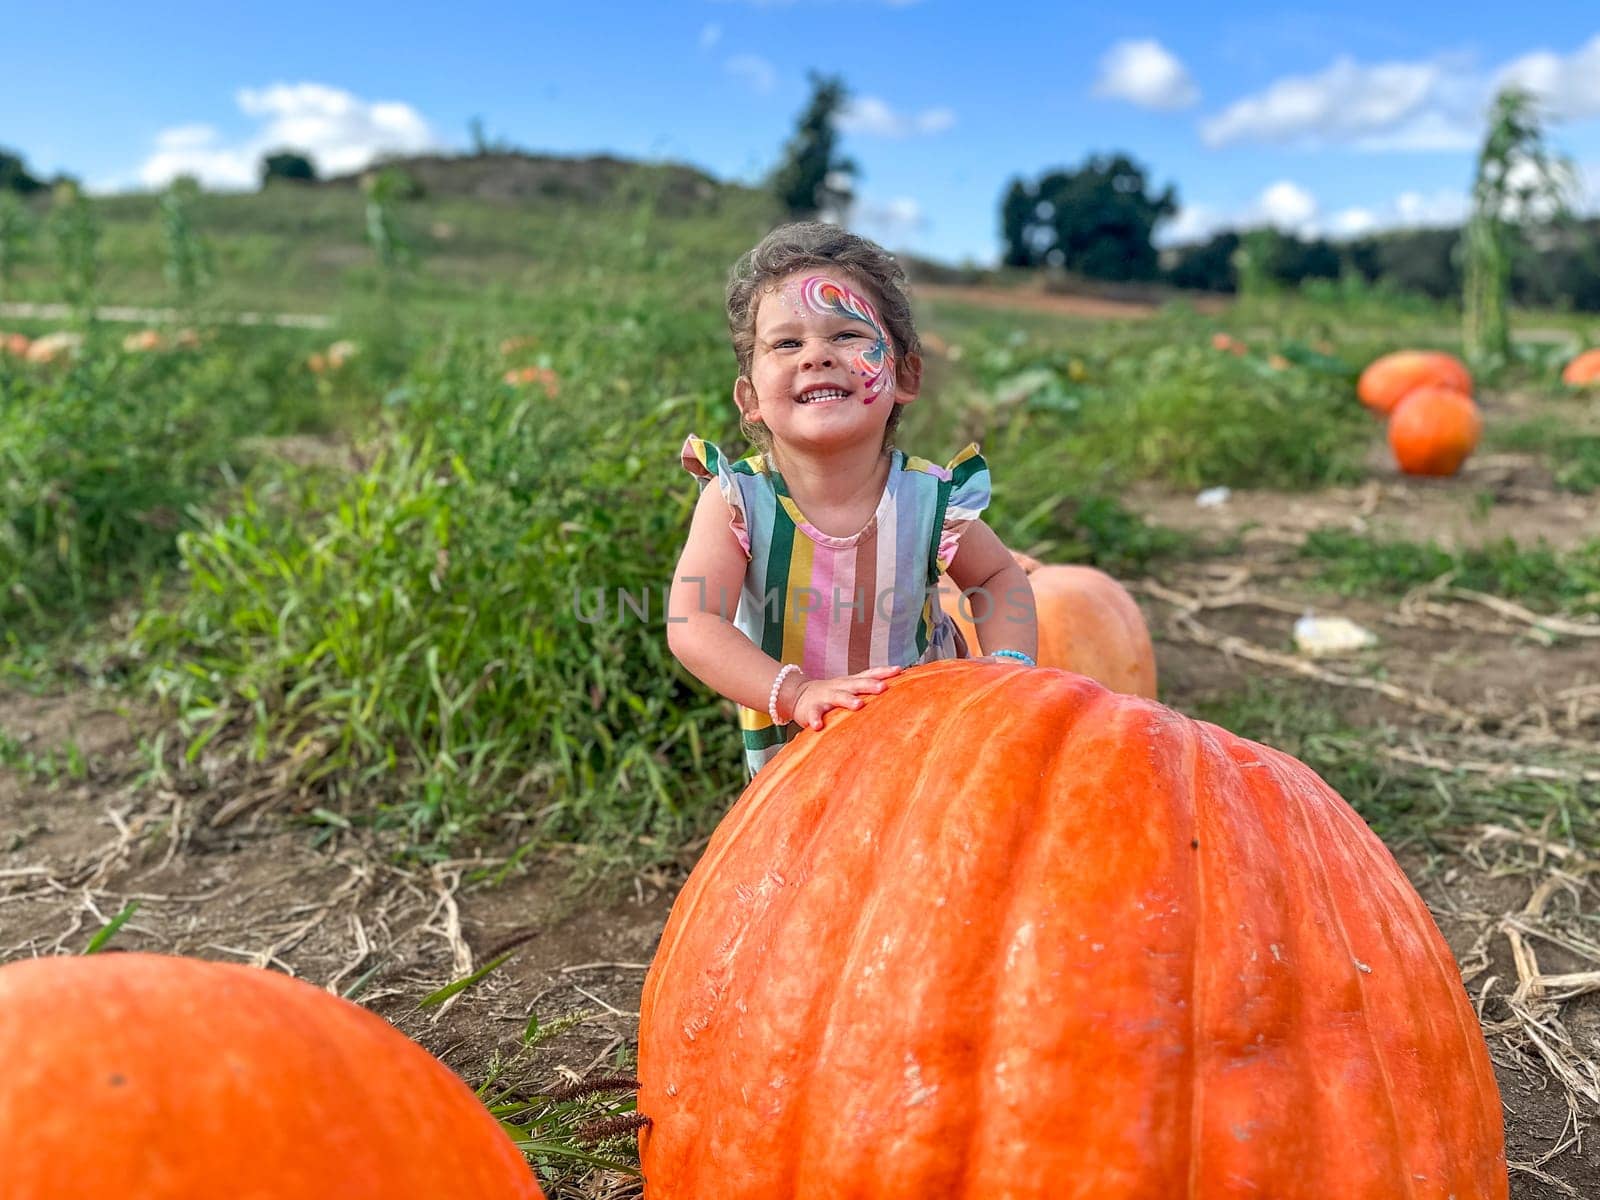 Little girl picking pumpkins on Halloween pumpkin patch. Child playing in field of squash, Thanksgiving holiday season.